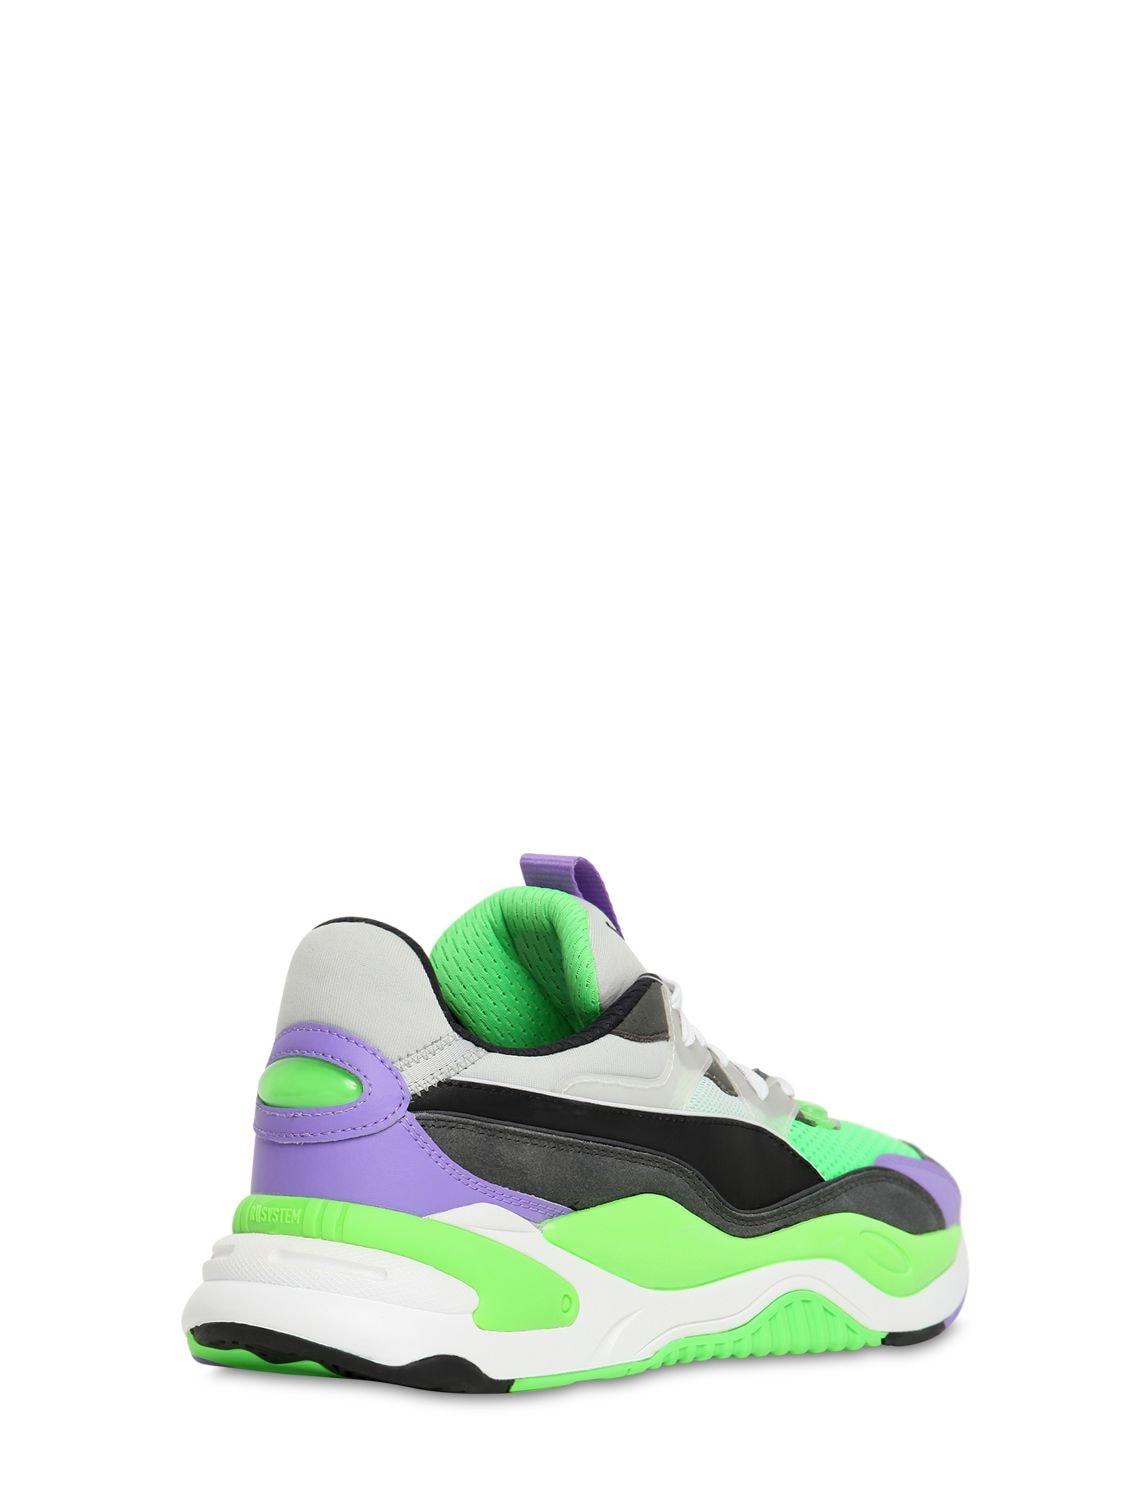 Puma Select Rs-2k Internet Exploring Sneakers in Neon Green (Green) for ...